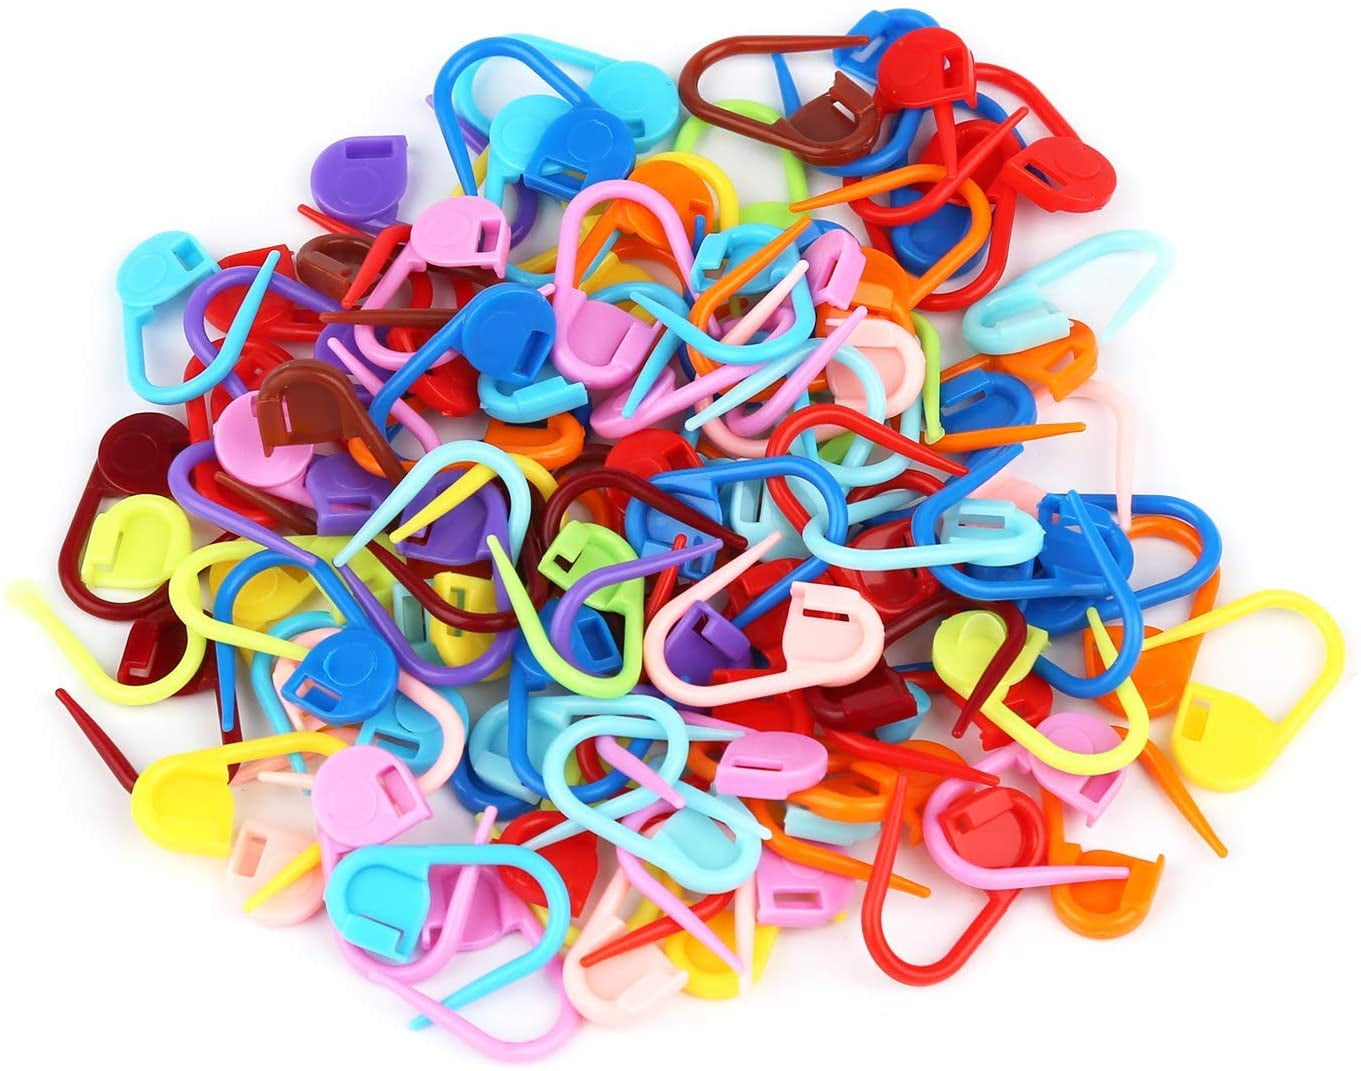 LNKA 500 Pcs Crochet Stitch Markers, Colorful Knitting Markers Crochet Clips Plastic Crochet Stitch Counters Crochet Clips for Weaving, Sewing and